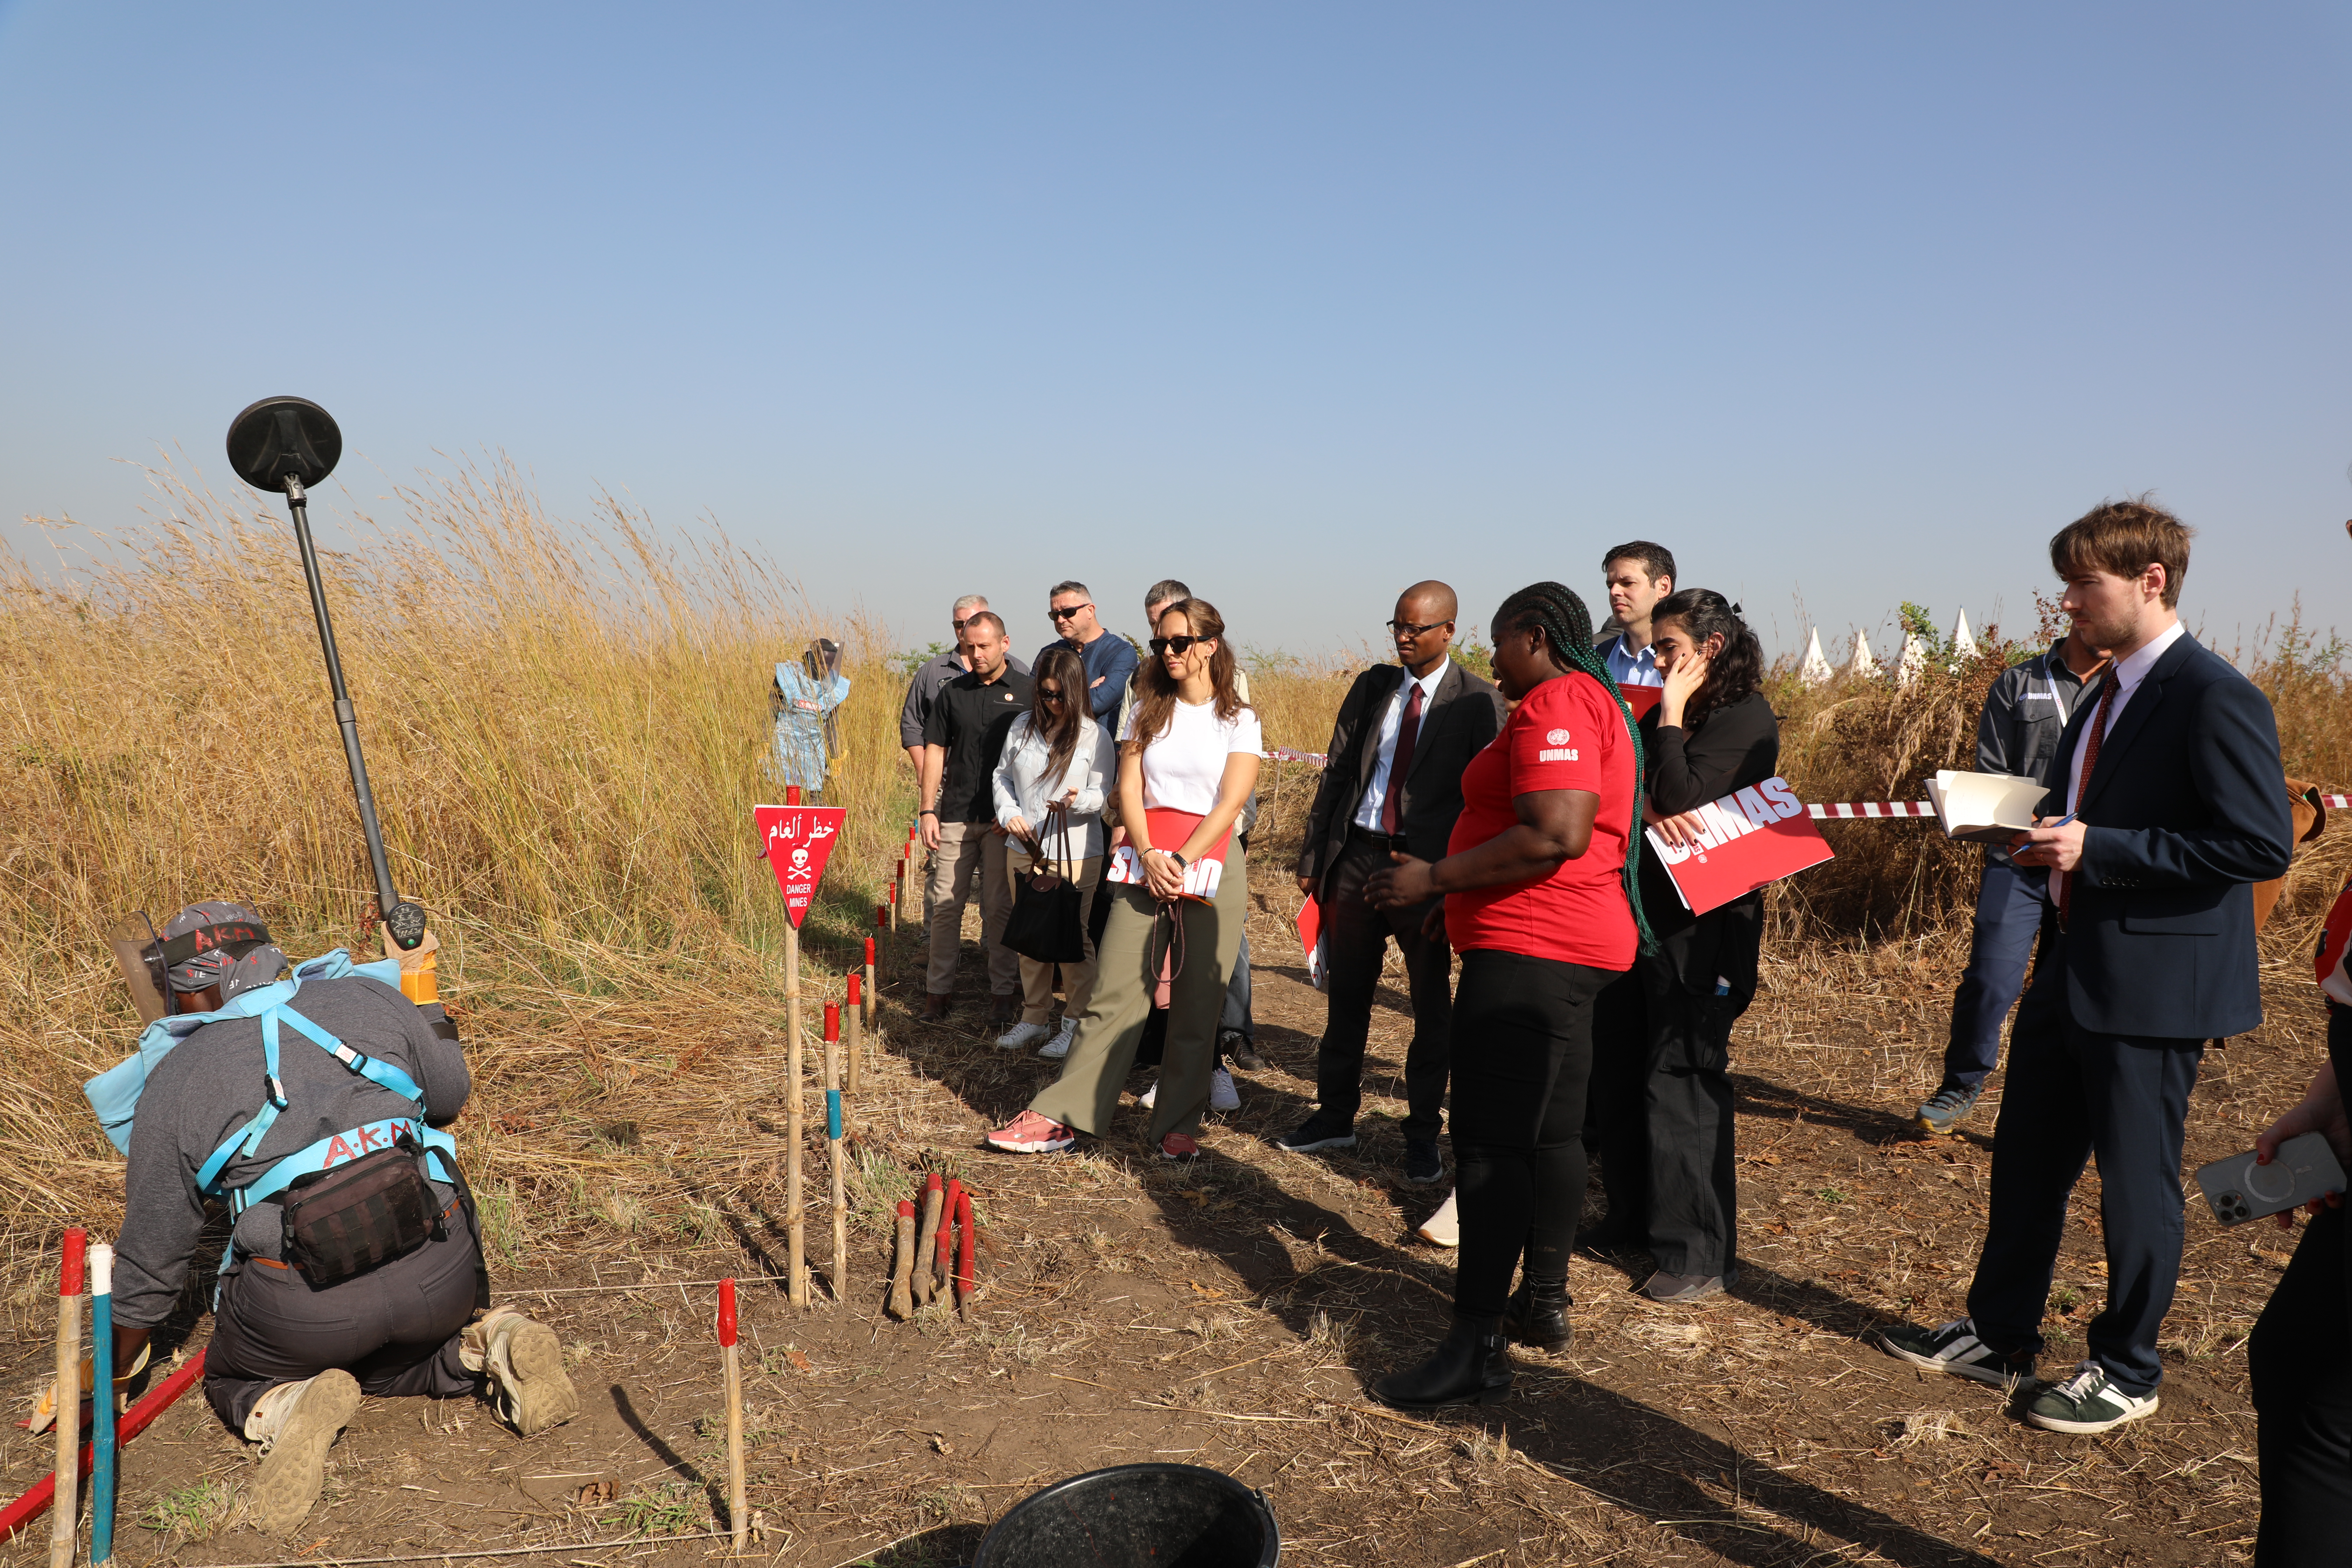 Informal Expert Group members visiting a demining site managed by UNMAS in Juba, South Sudan. Photo: UNMAS